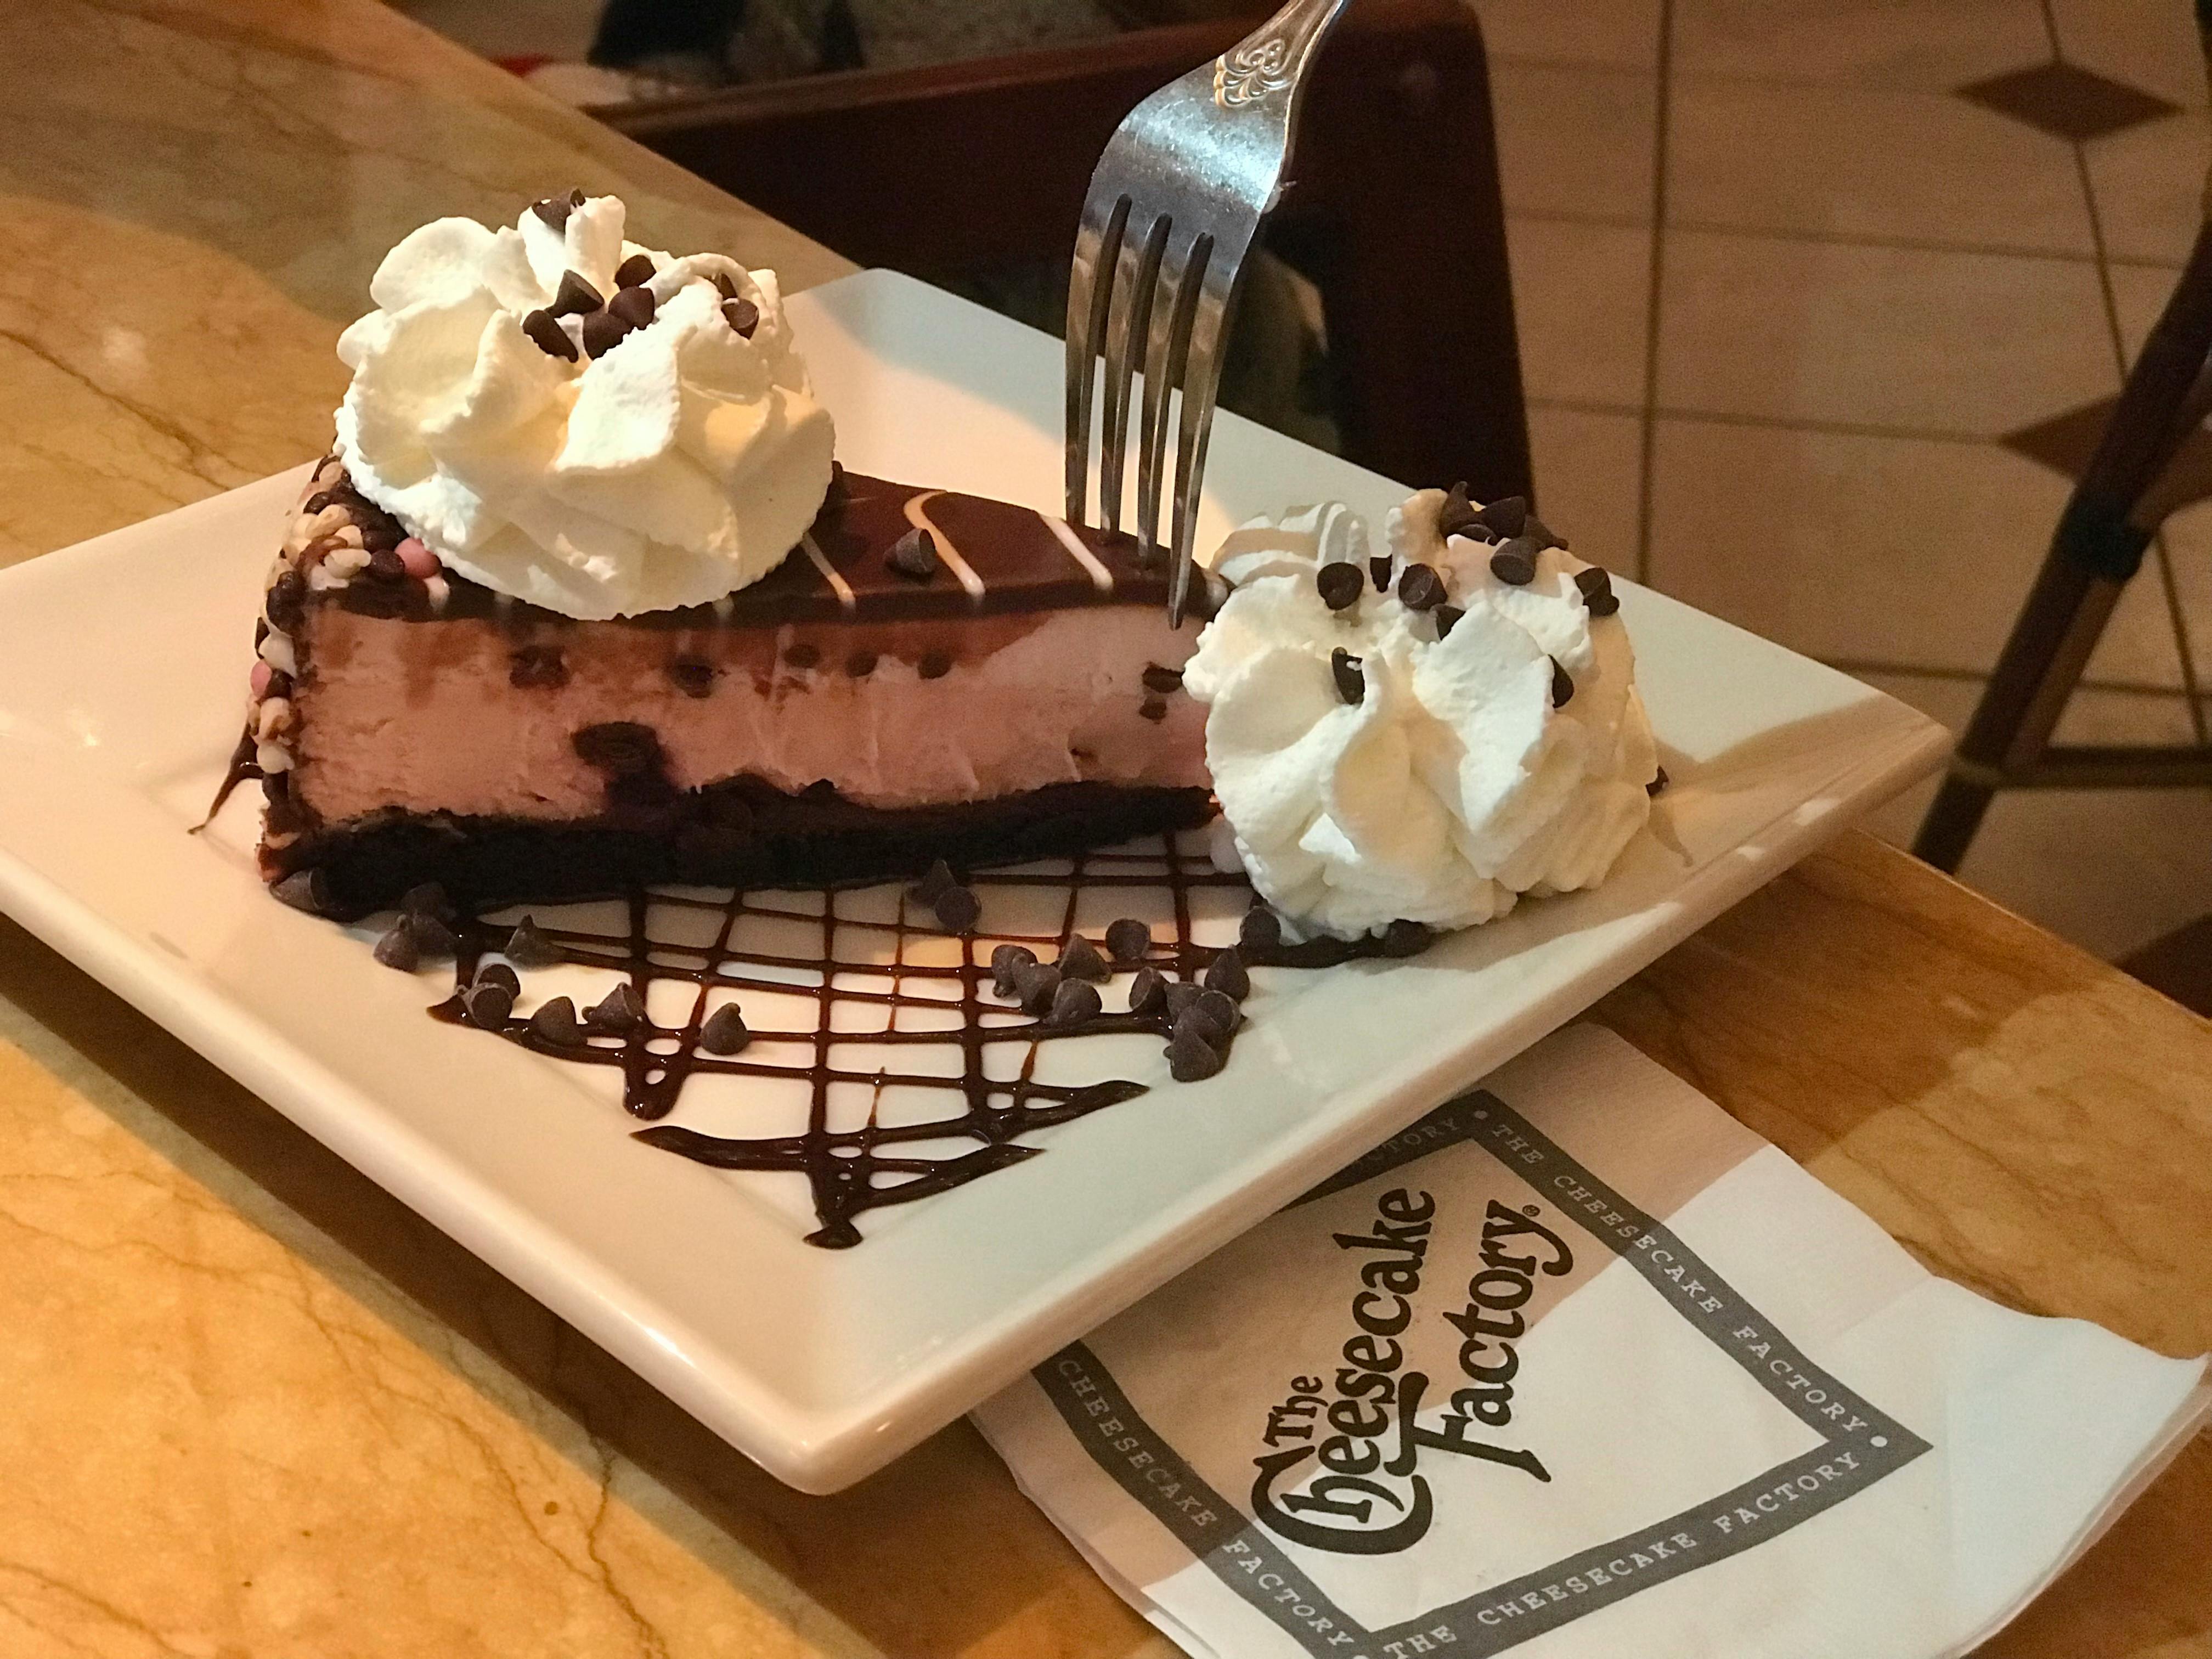 A plate with chocolate cheesecake with whipped cream and a cheesecake factory napkin next to it on a table.